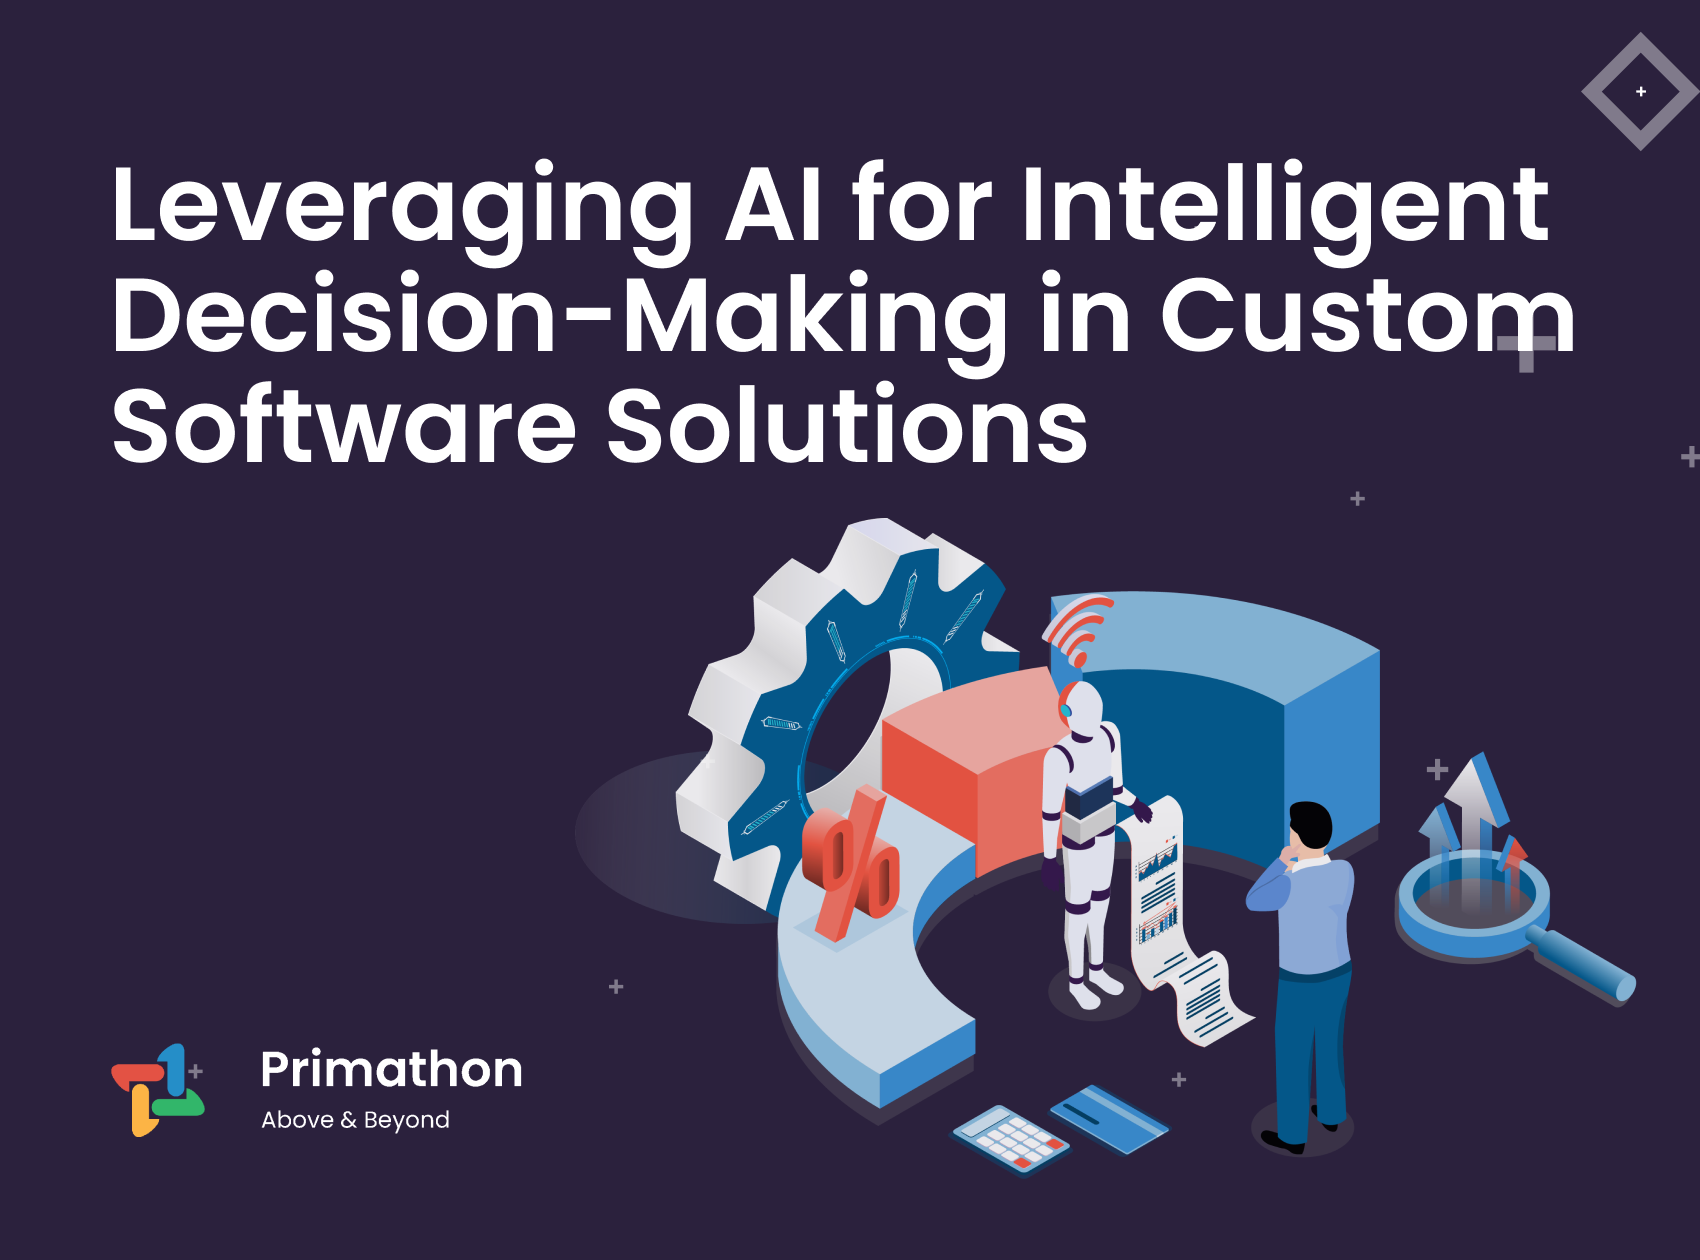 Leveraging AI for Intelligent Decision-Making in Custom Software Solutions